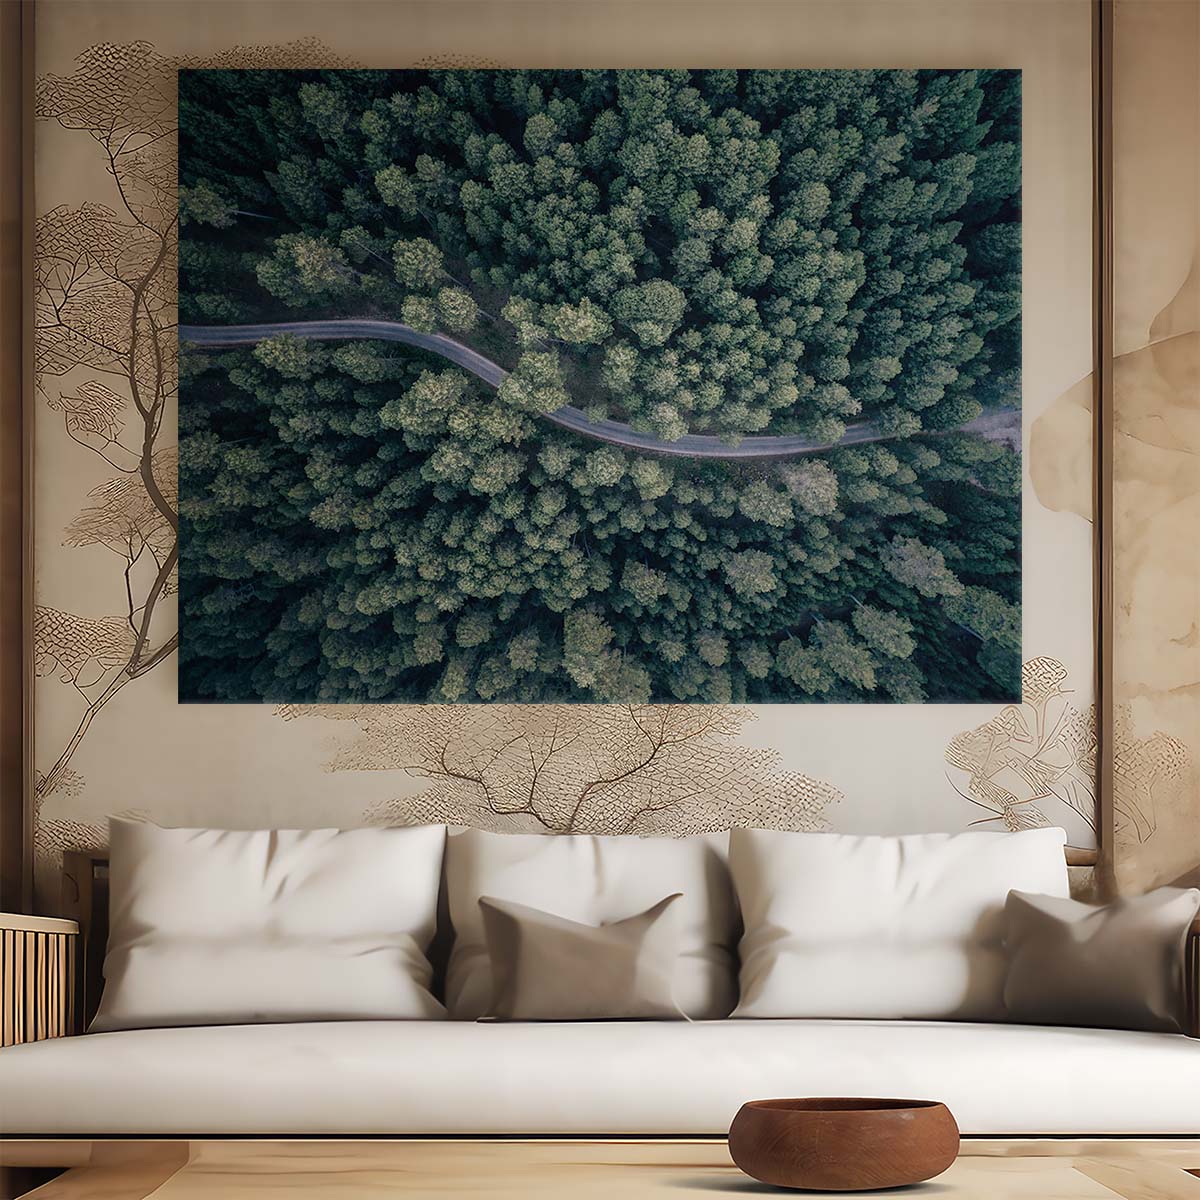 Aerial Forest Road Perspective Wall Art by Luxuriance Designs. Made in USA.